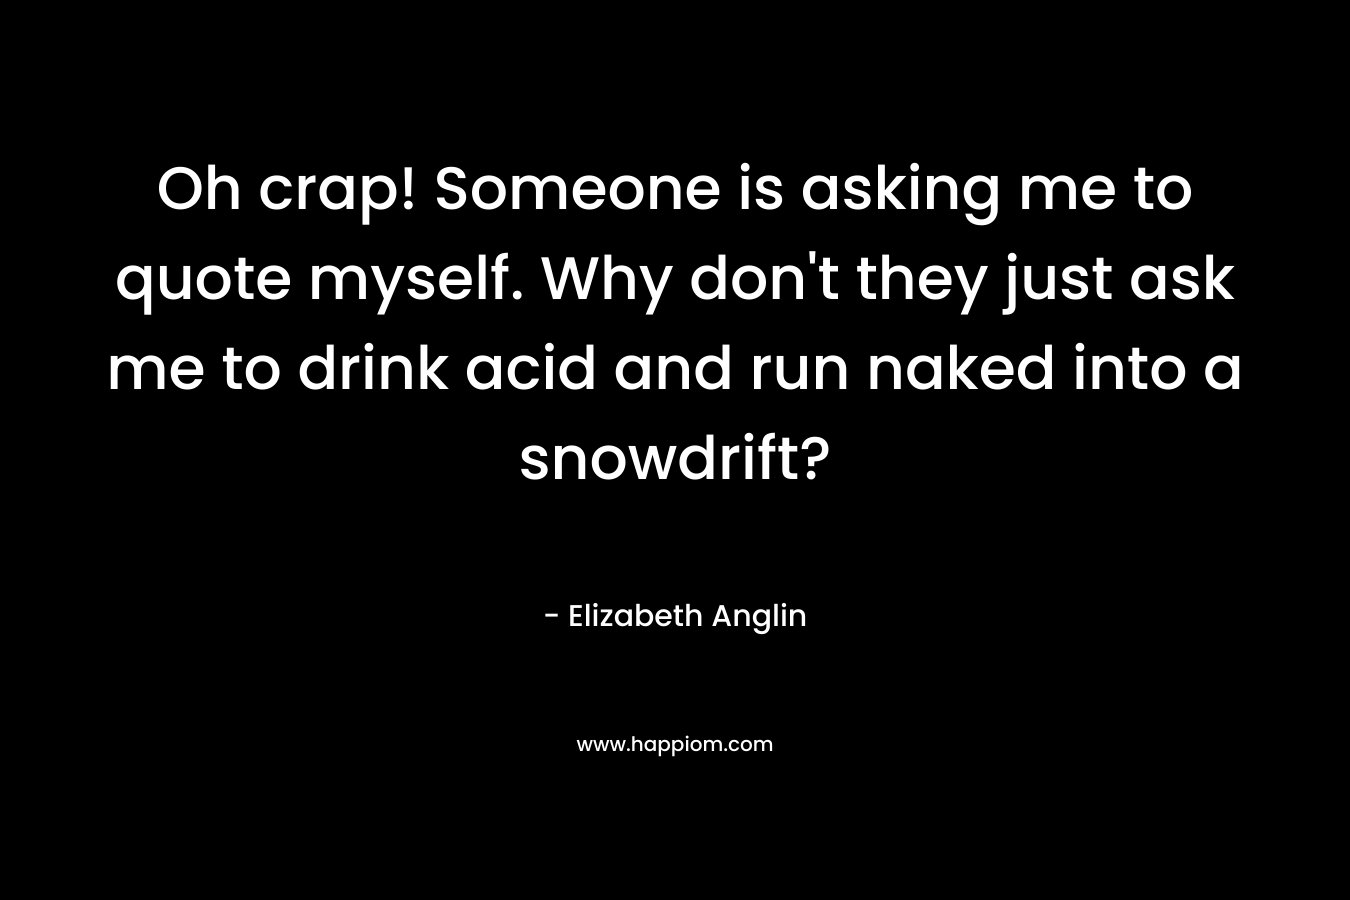 Oh crap! Someone is asking me to quote myself. Why don’t they just ask me to drink acid and run naked into a snowdrift? – Elizabeth  Anglin